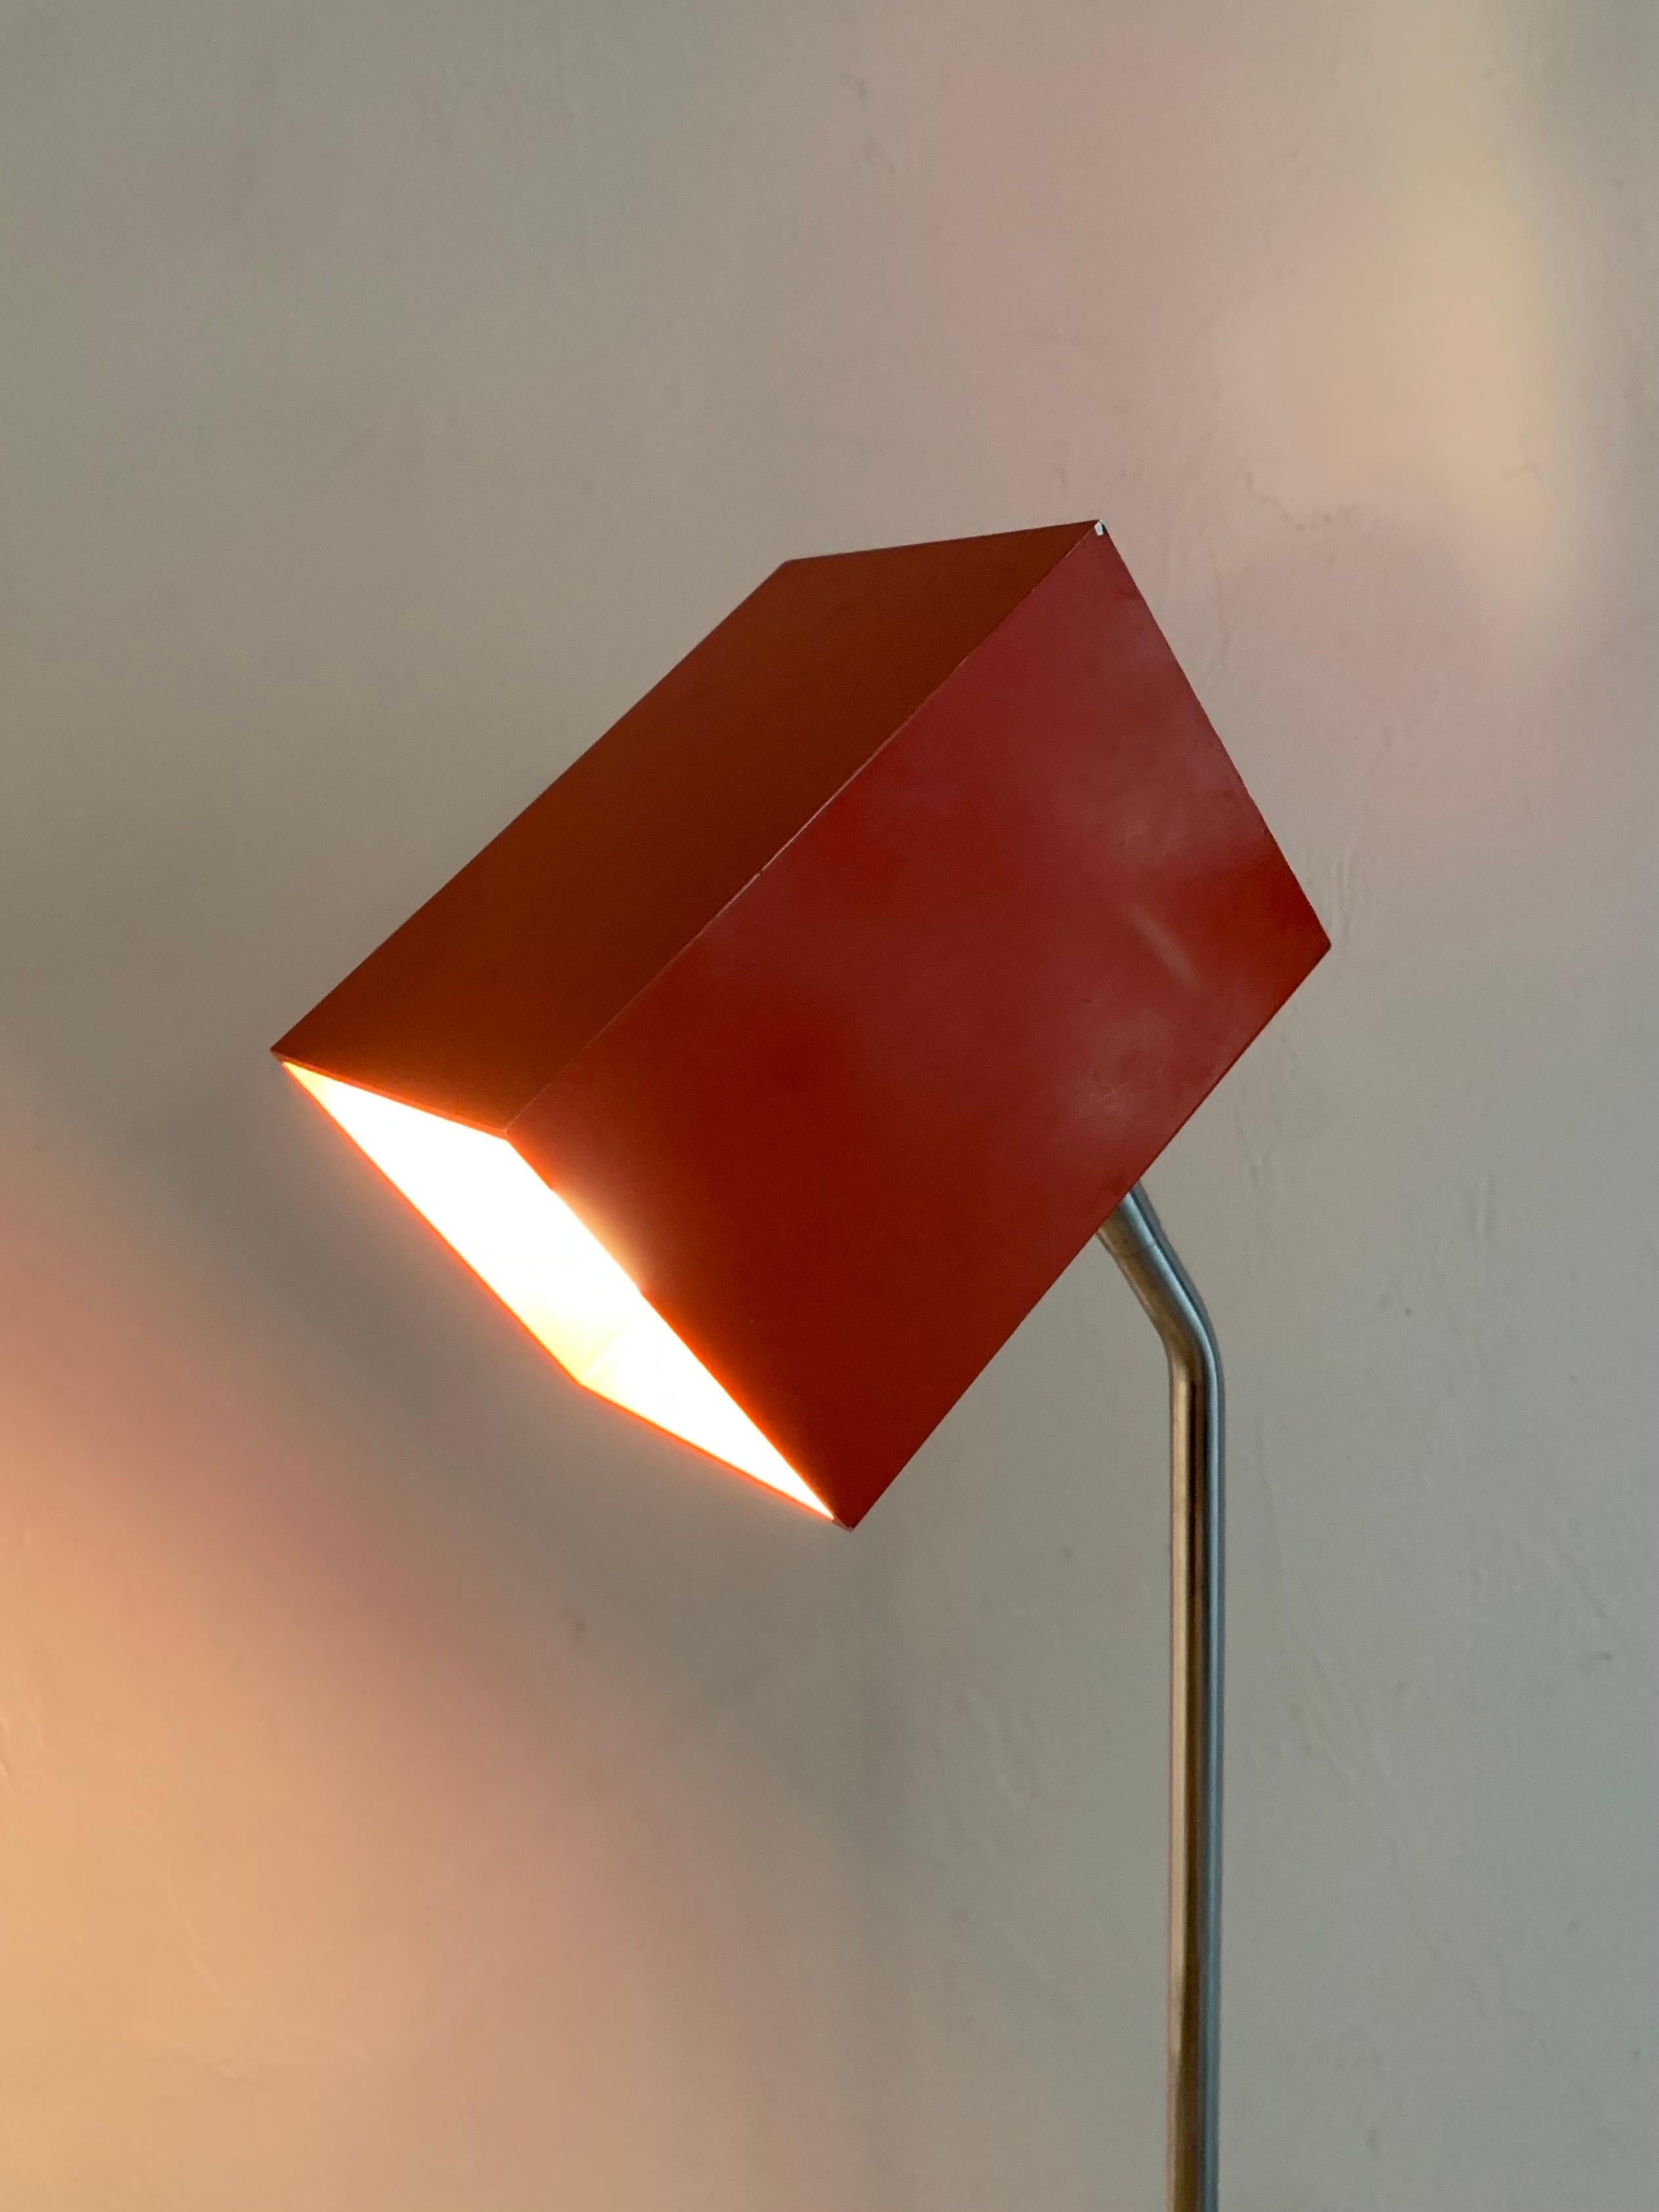 Cut Steel Sonneman for Kovacs Steel and Chrome Cubist Floor Lamp in Red, 1950s For Sale